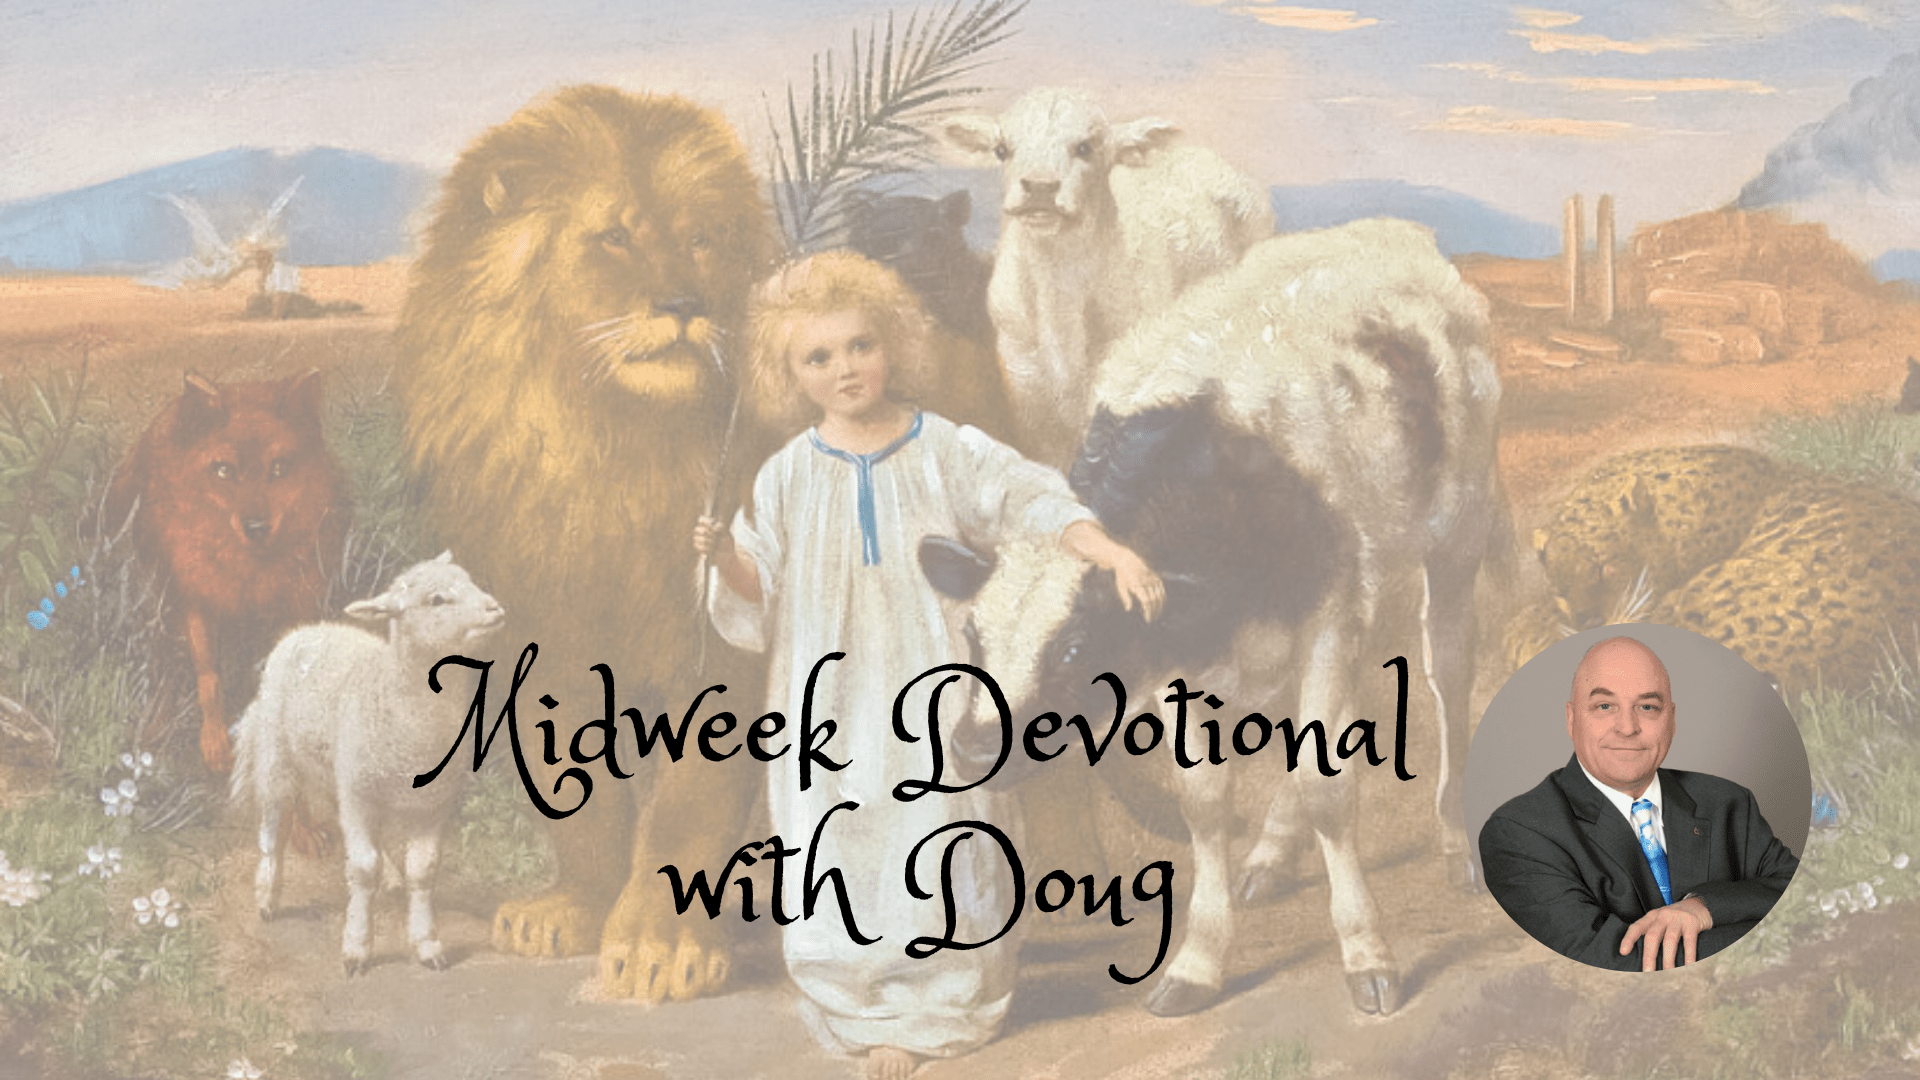 Midweek Devotional with Doug for first week of July